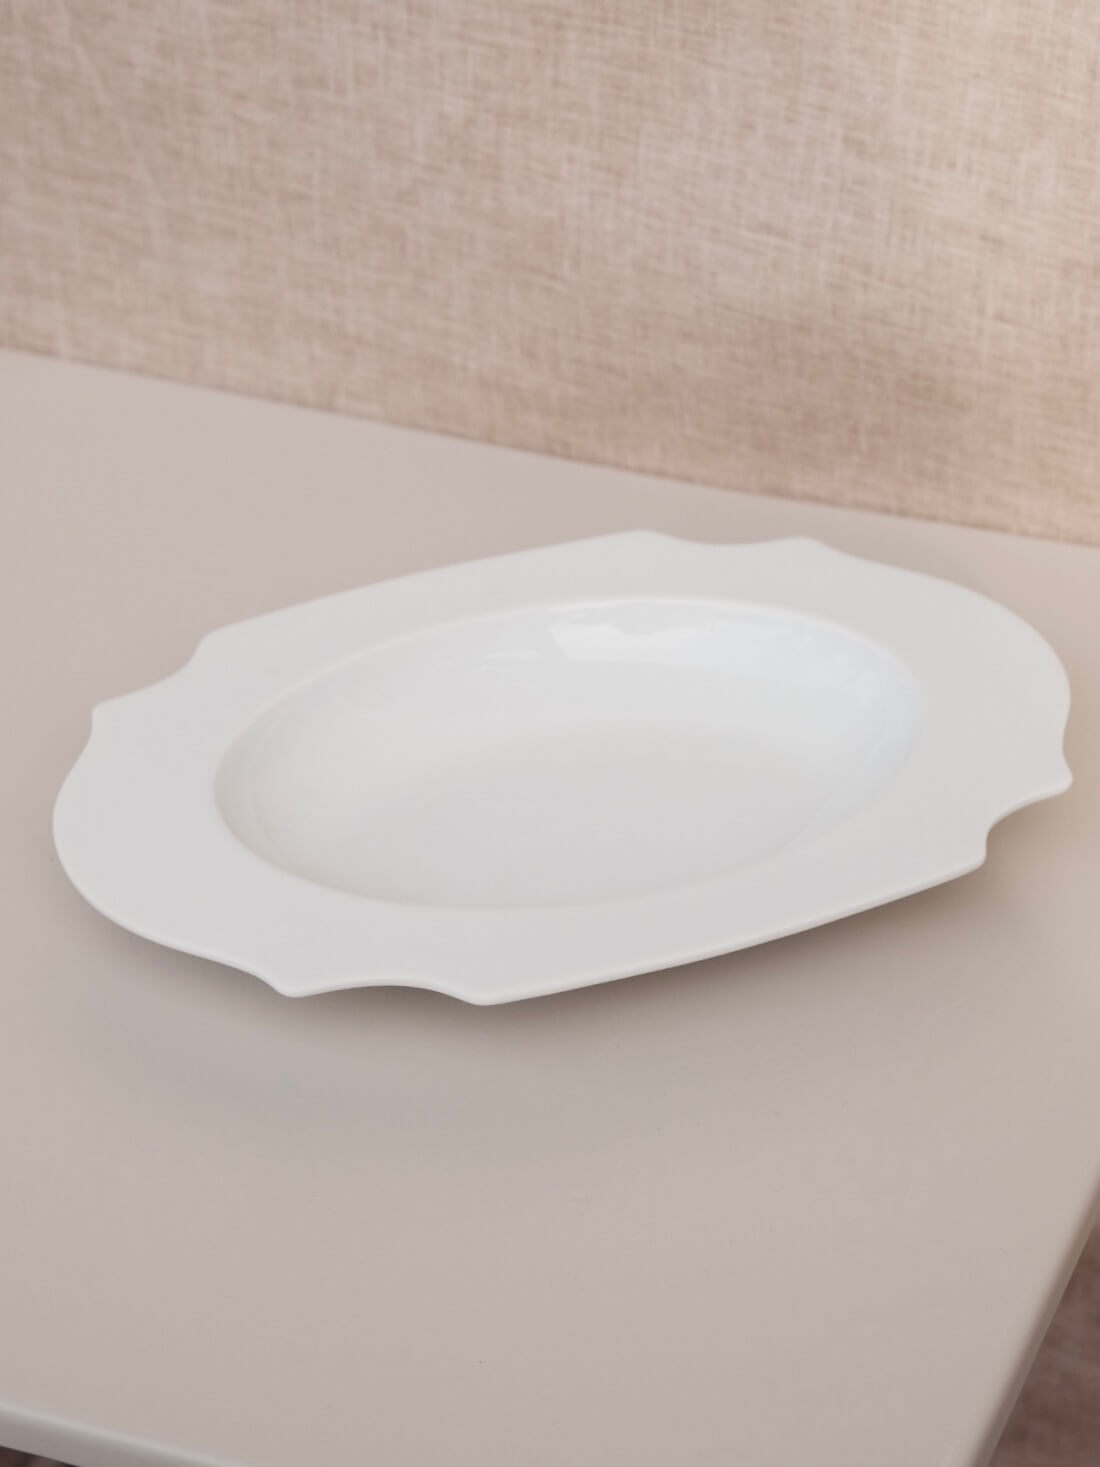 Oval Shallow Bowl